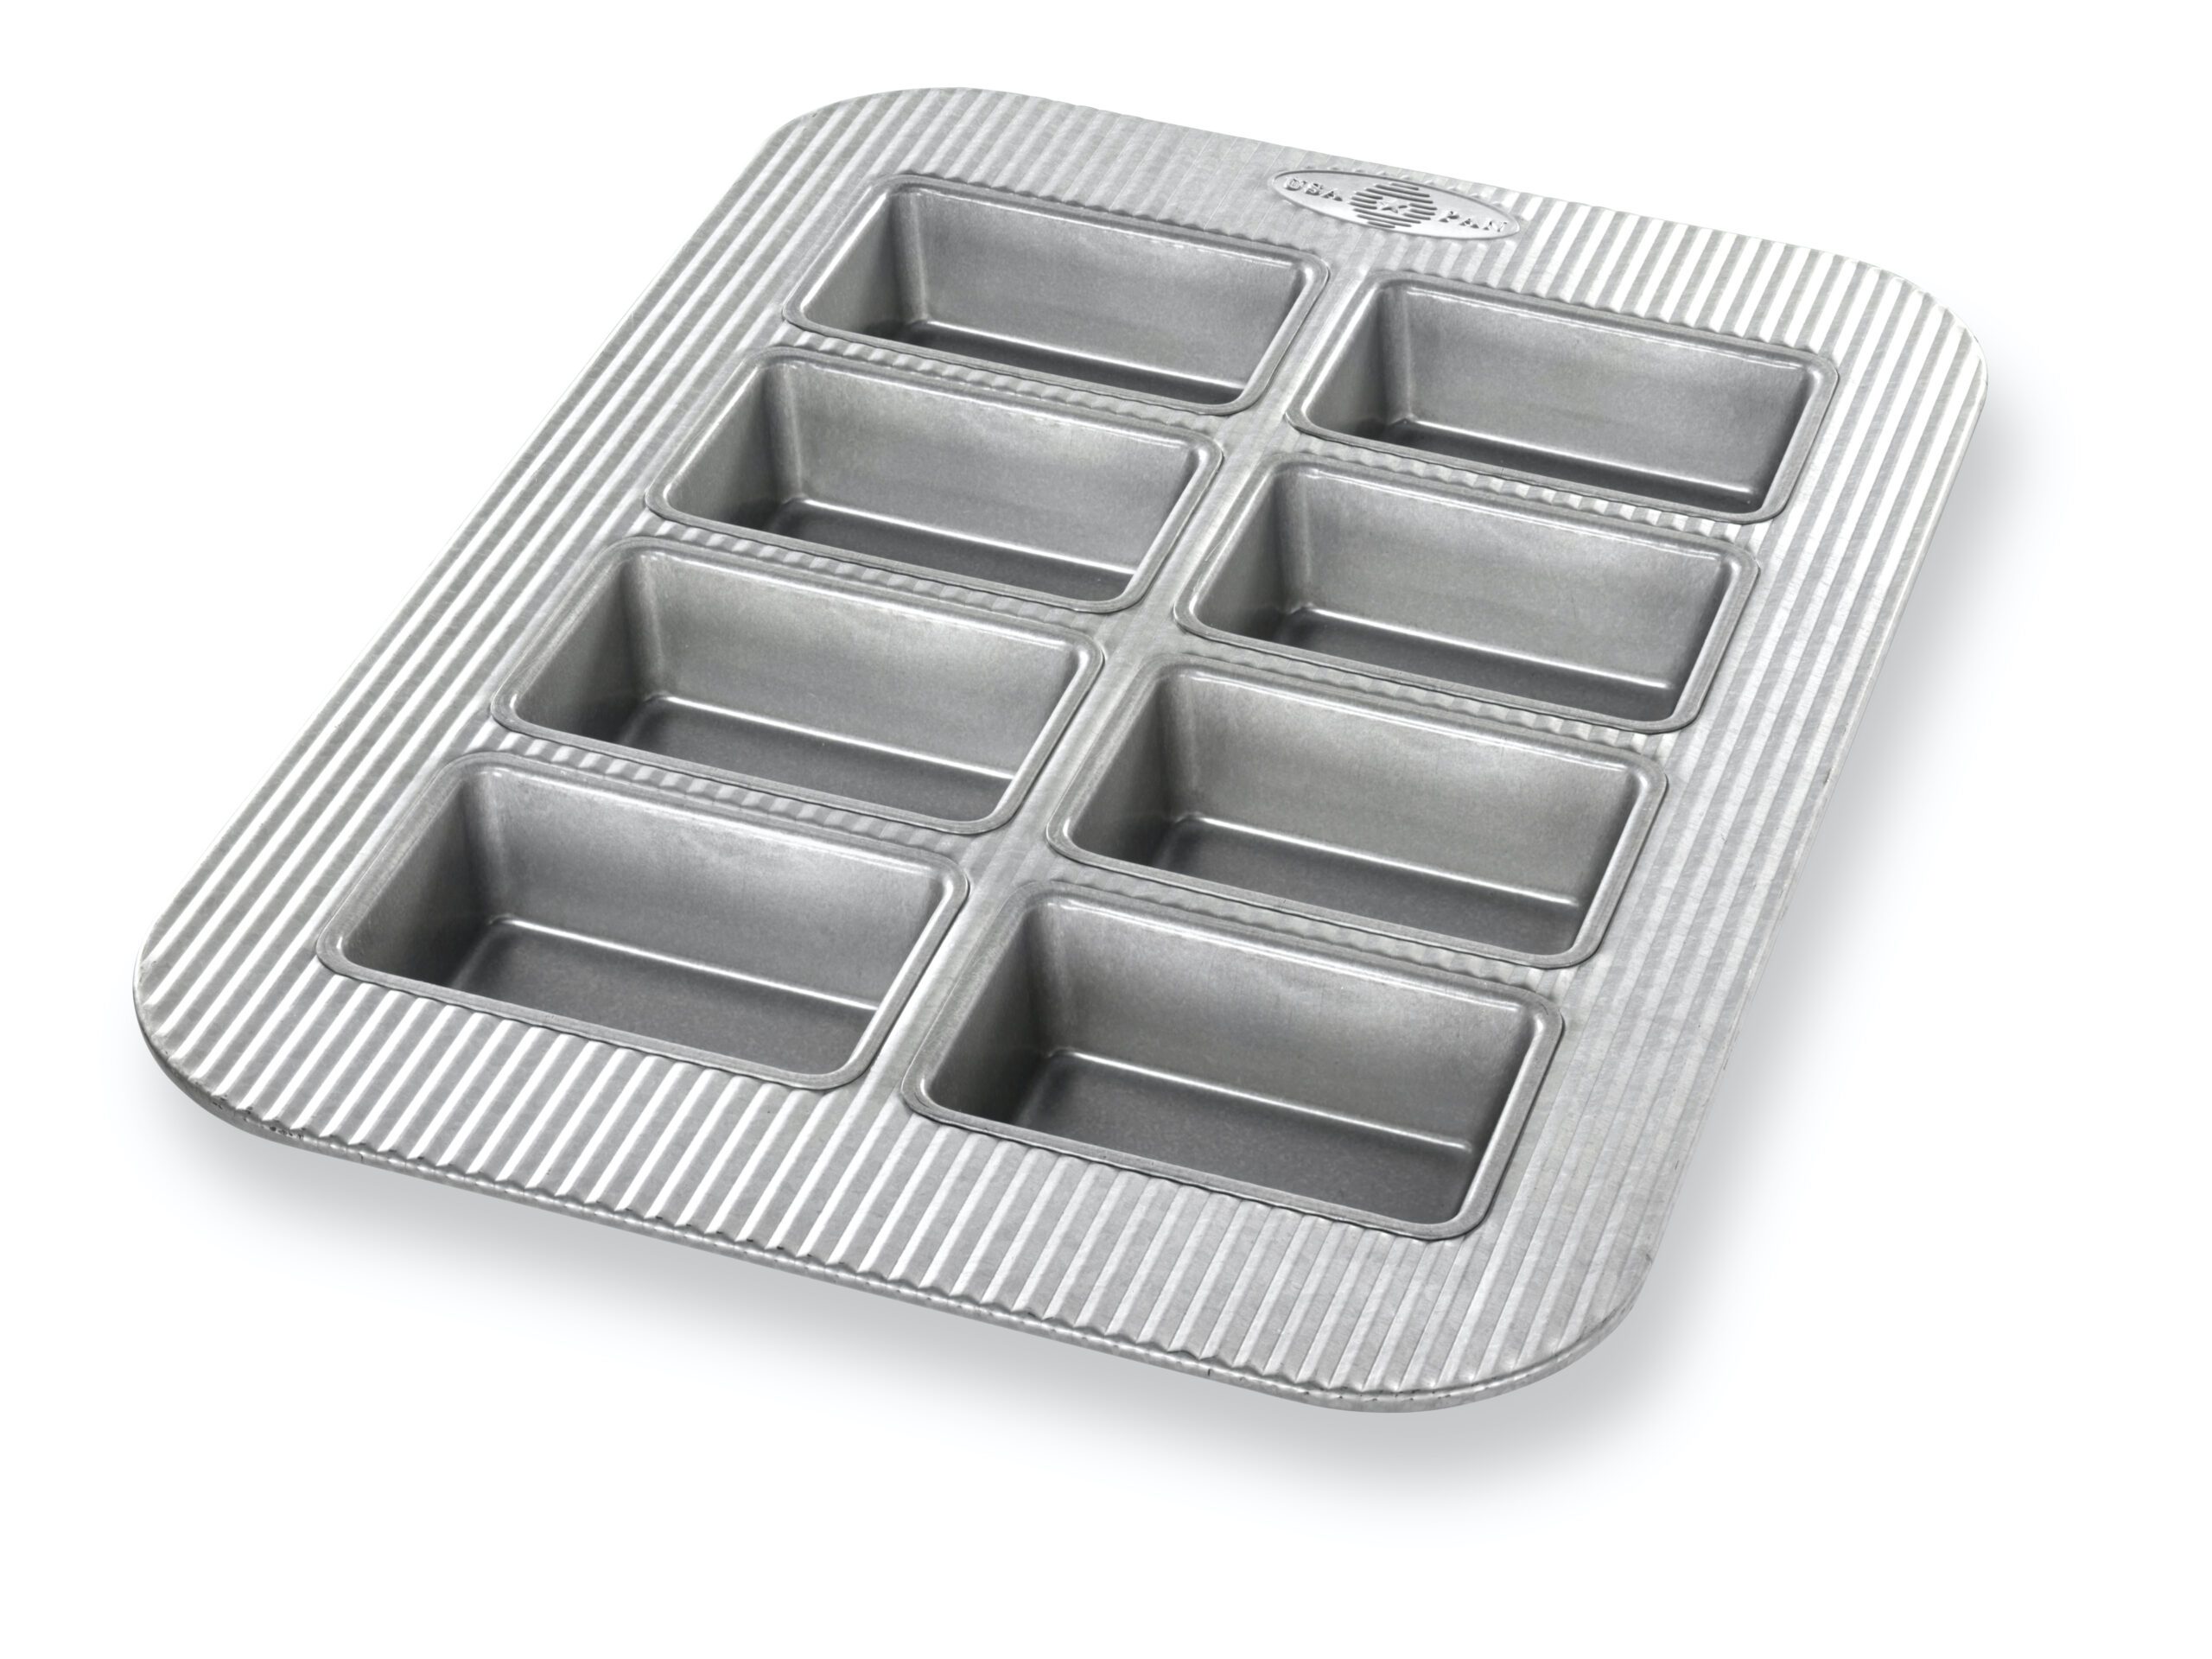 Square Cake Pan for Baking Delightful Cakes